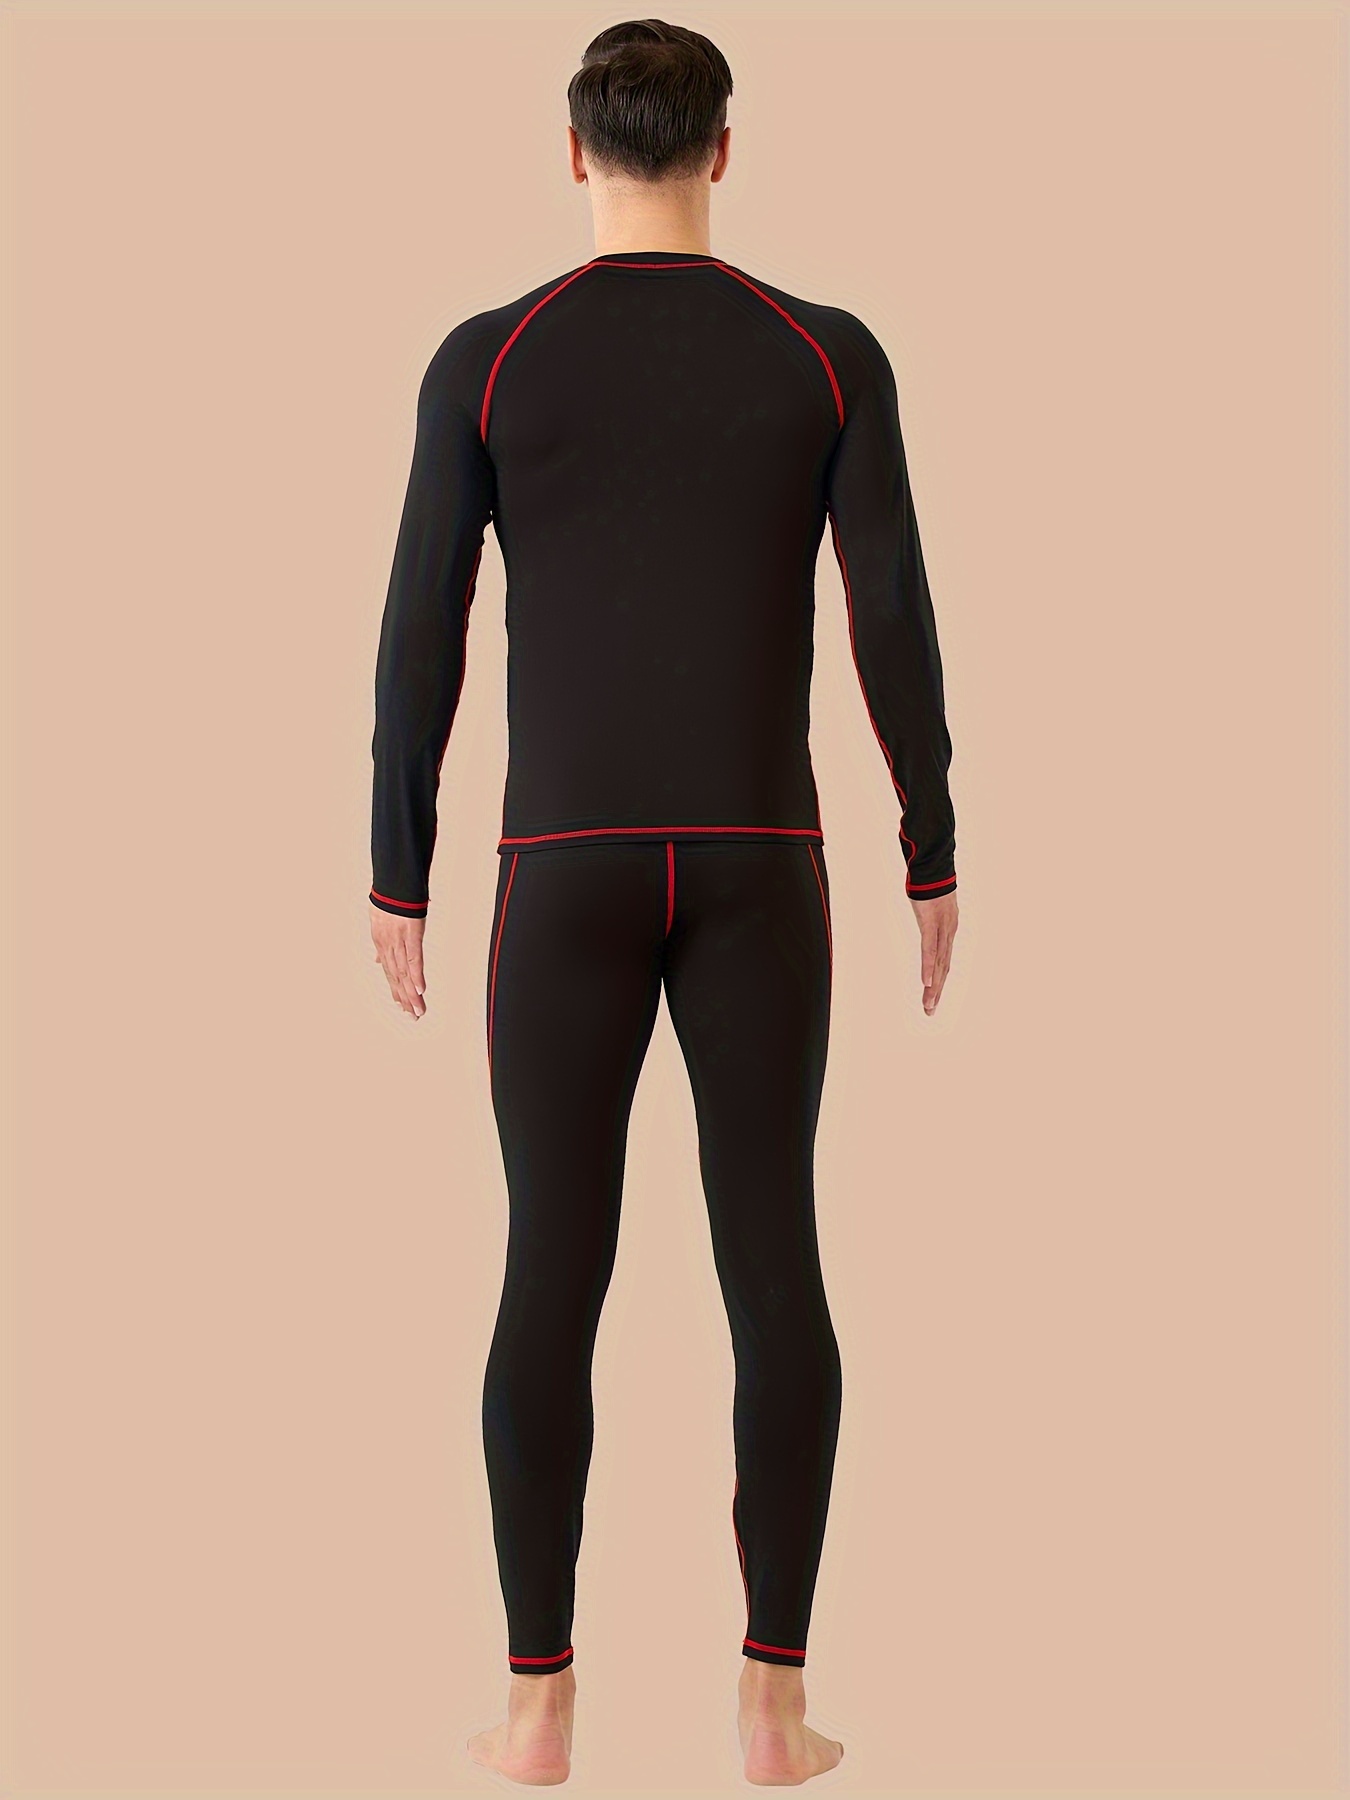 Men's Thermal Underwear Set, Winter Base Layer Sport Long Johns Top &  Bottom Suit Compression Cold Weather Gear for Skiing